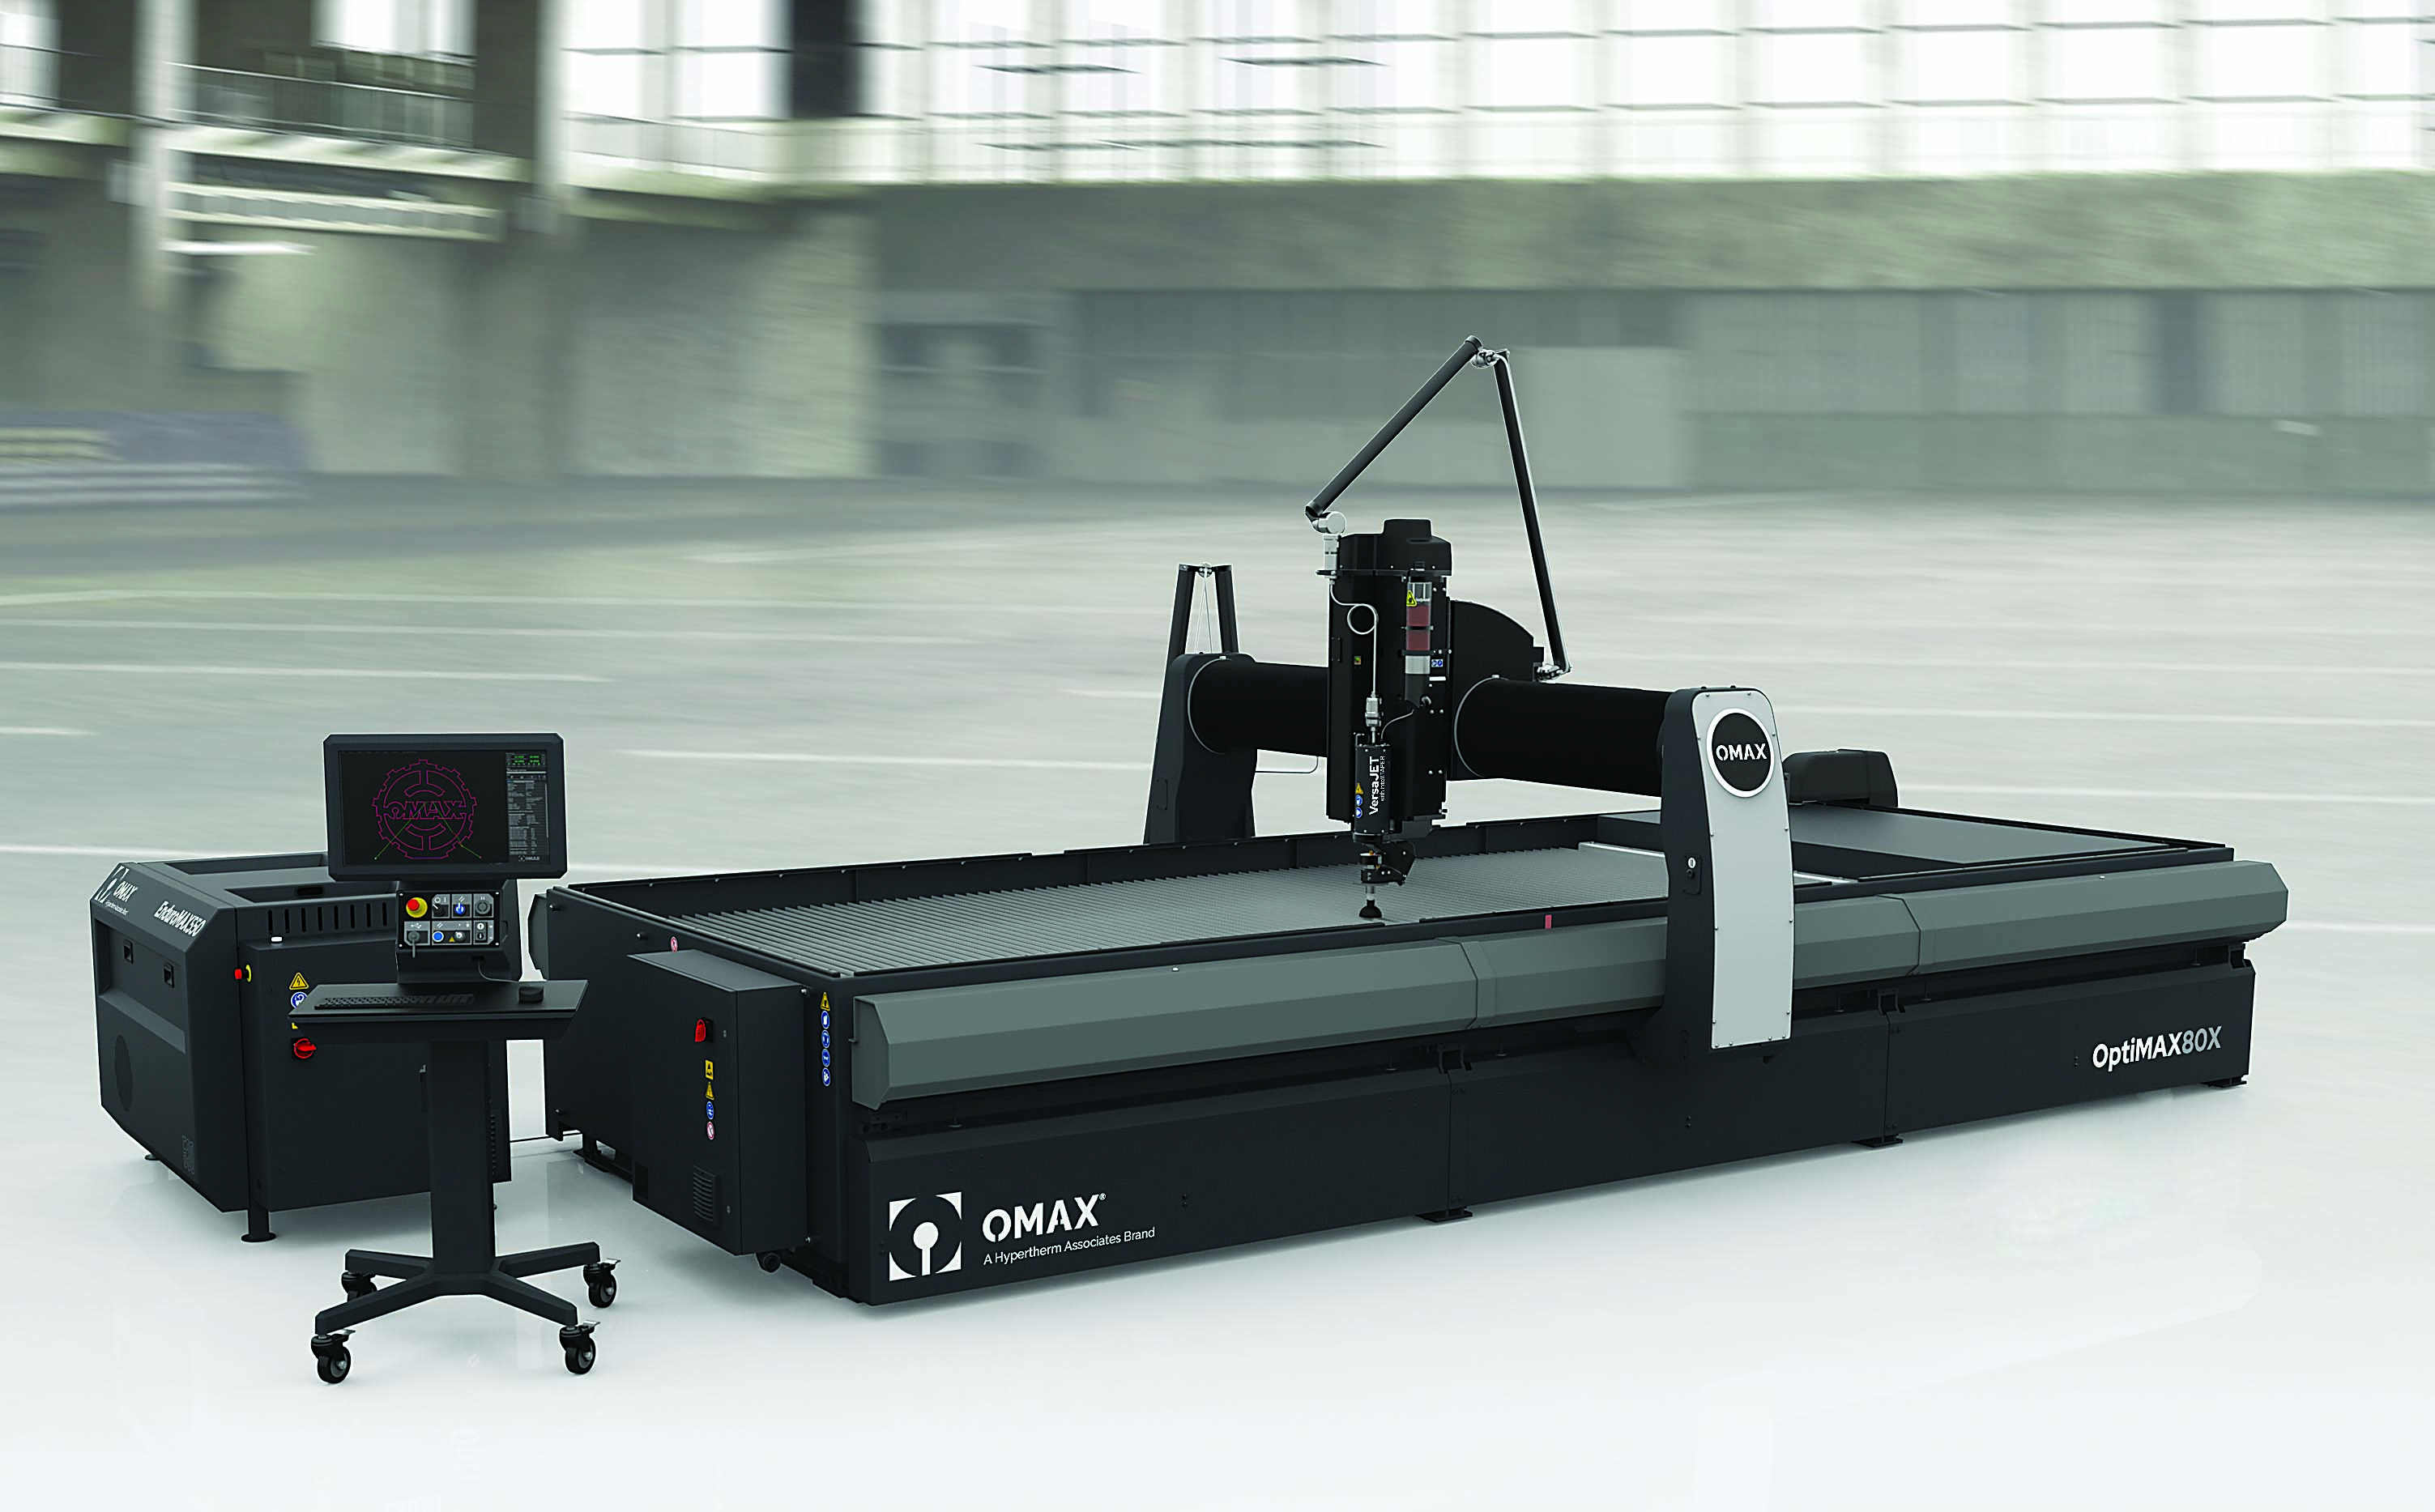 The OptiMax waterjet offers general-purpose cutting capability and automation aimed at minimizing demands on operators.